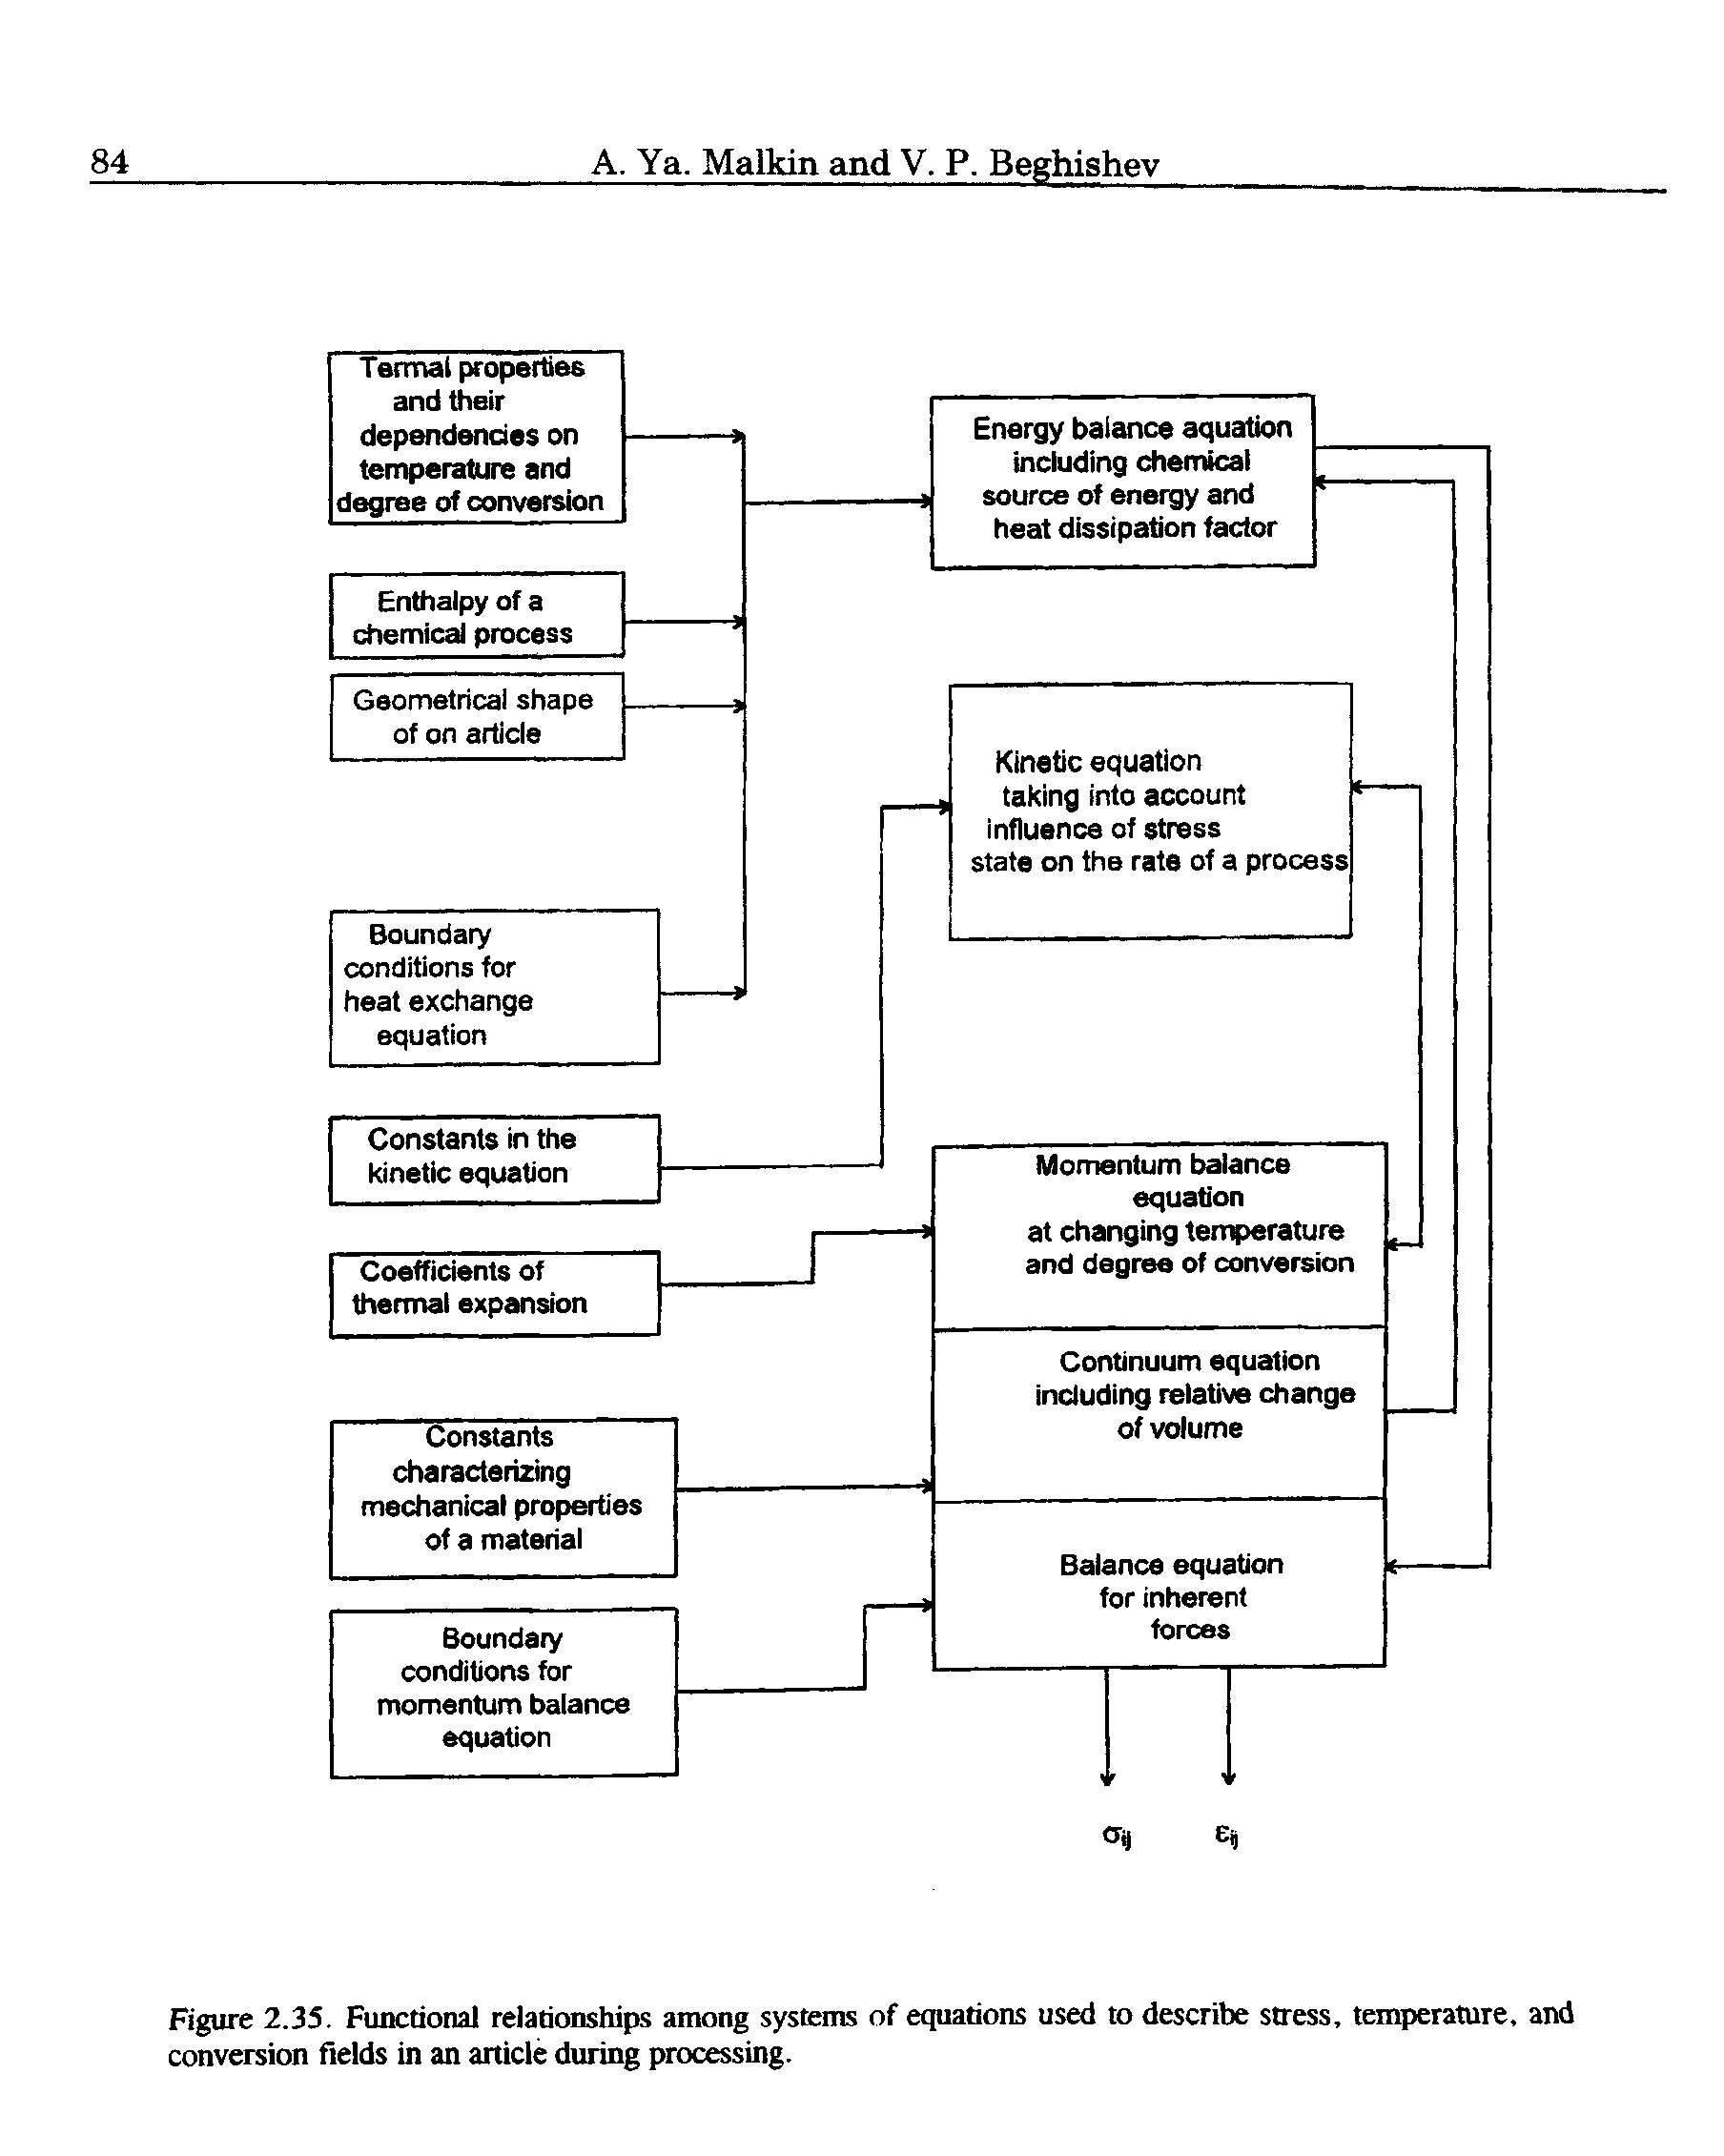 Figure 2.35. Functional relationships among systems of equations used to describe stress, temperature, and conversion fields in an article dining processing.